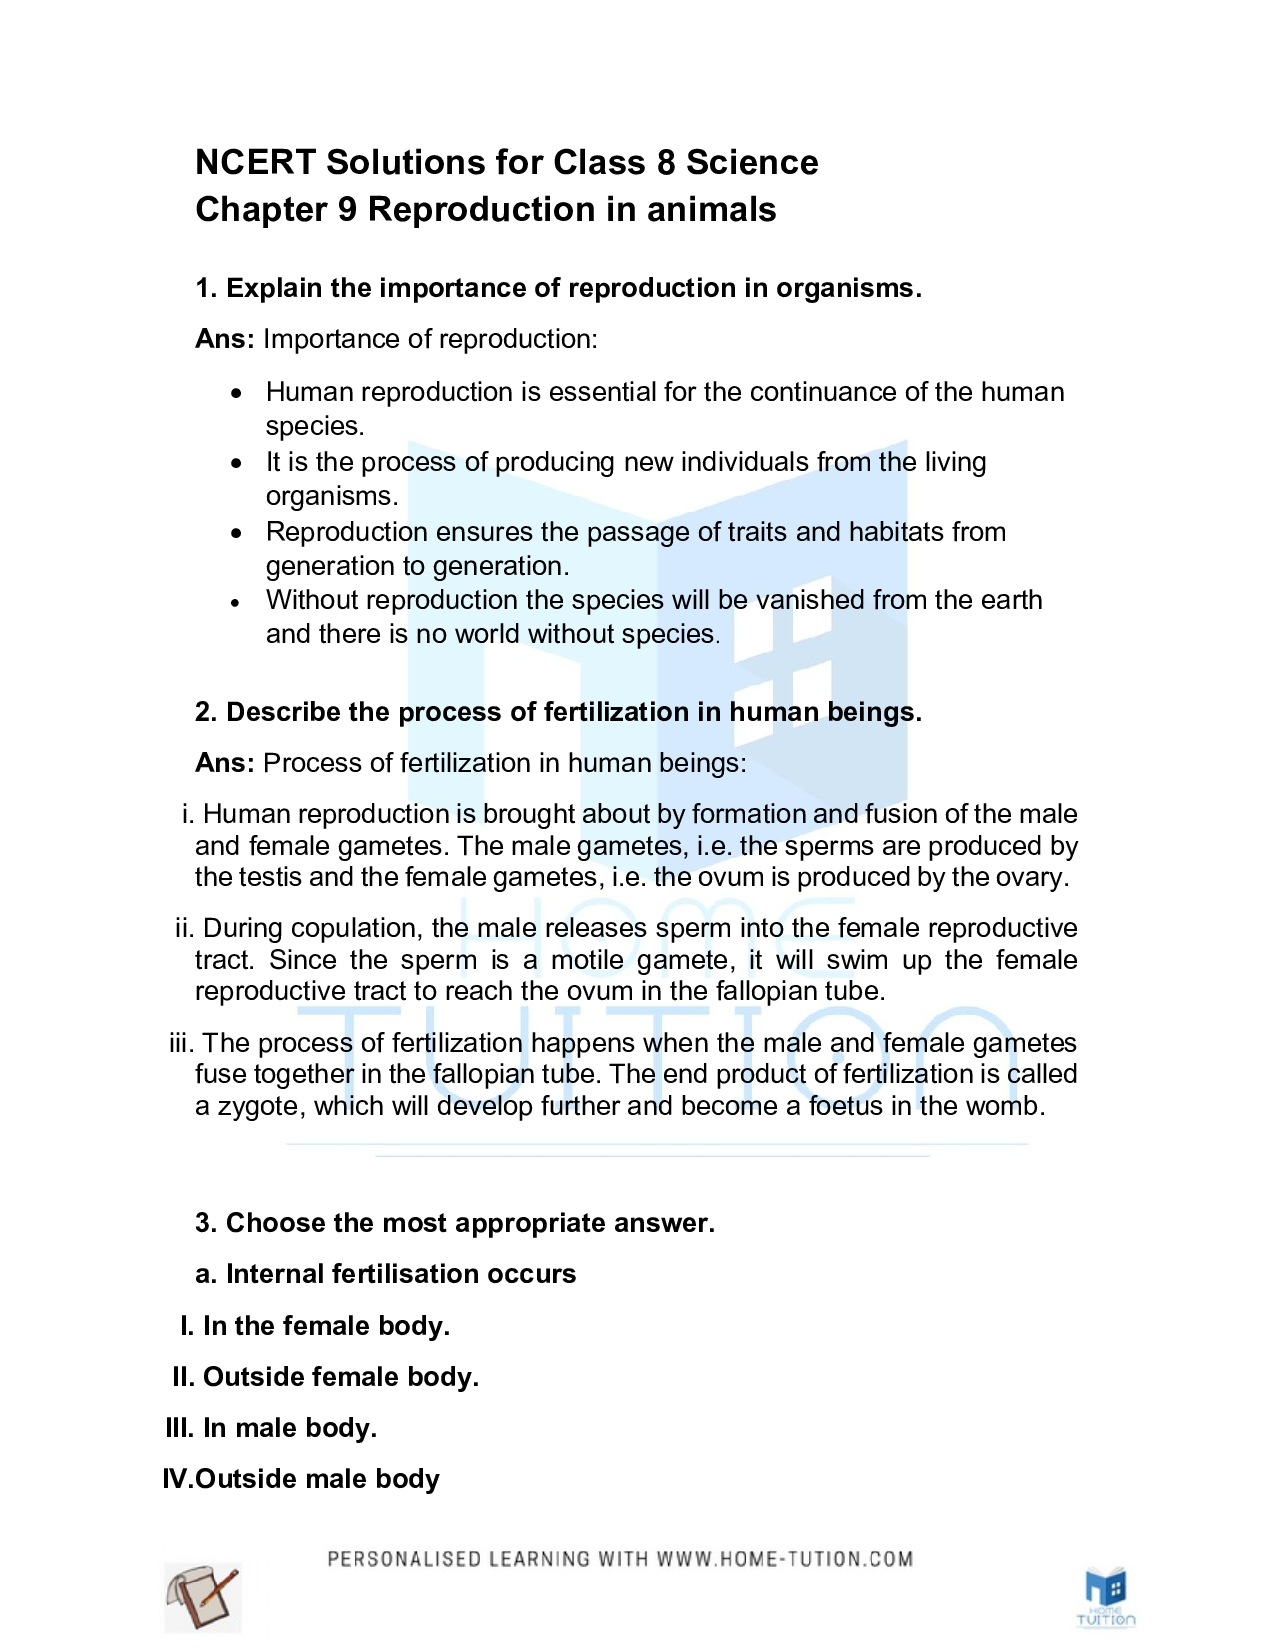 Class 8 Science Chapter 9 Reproduction in Animals